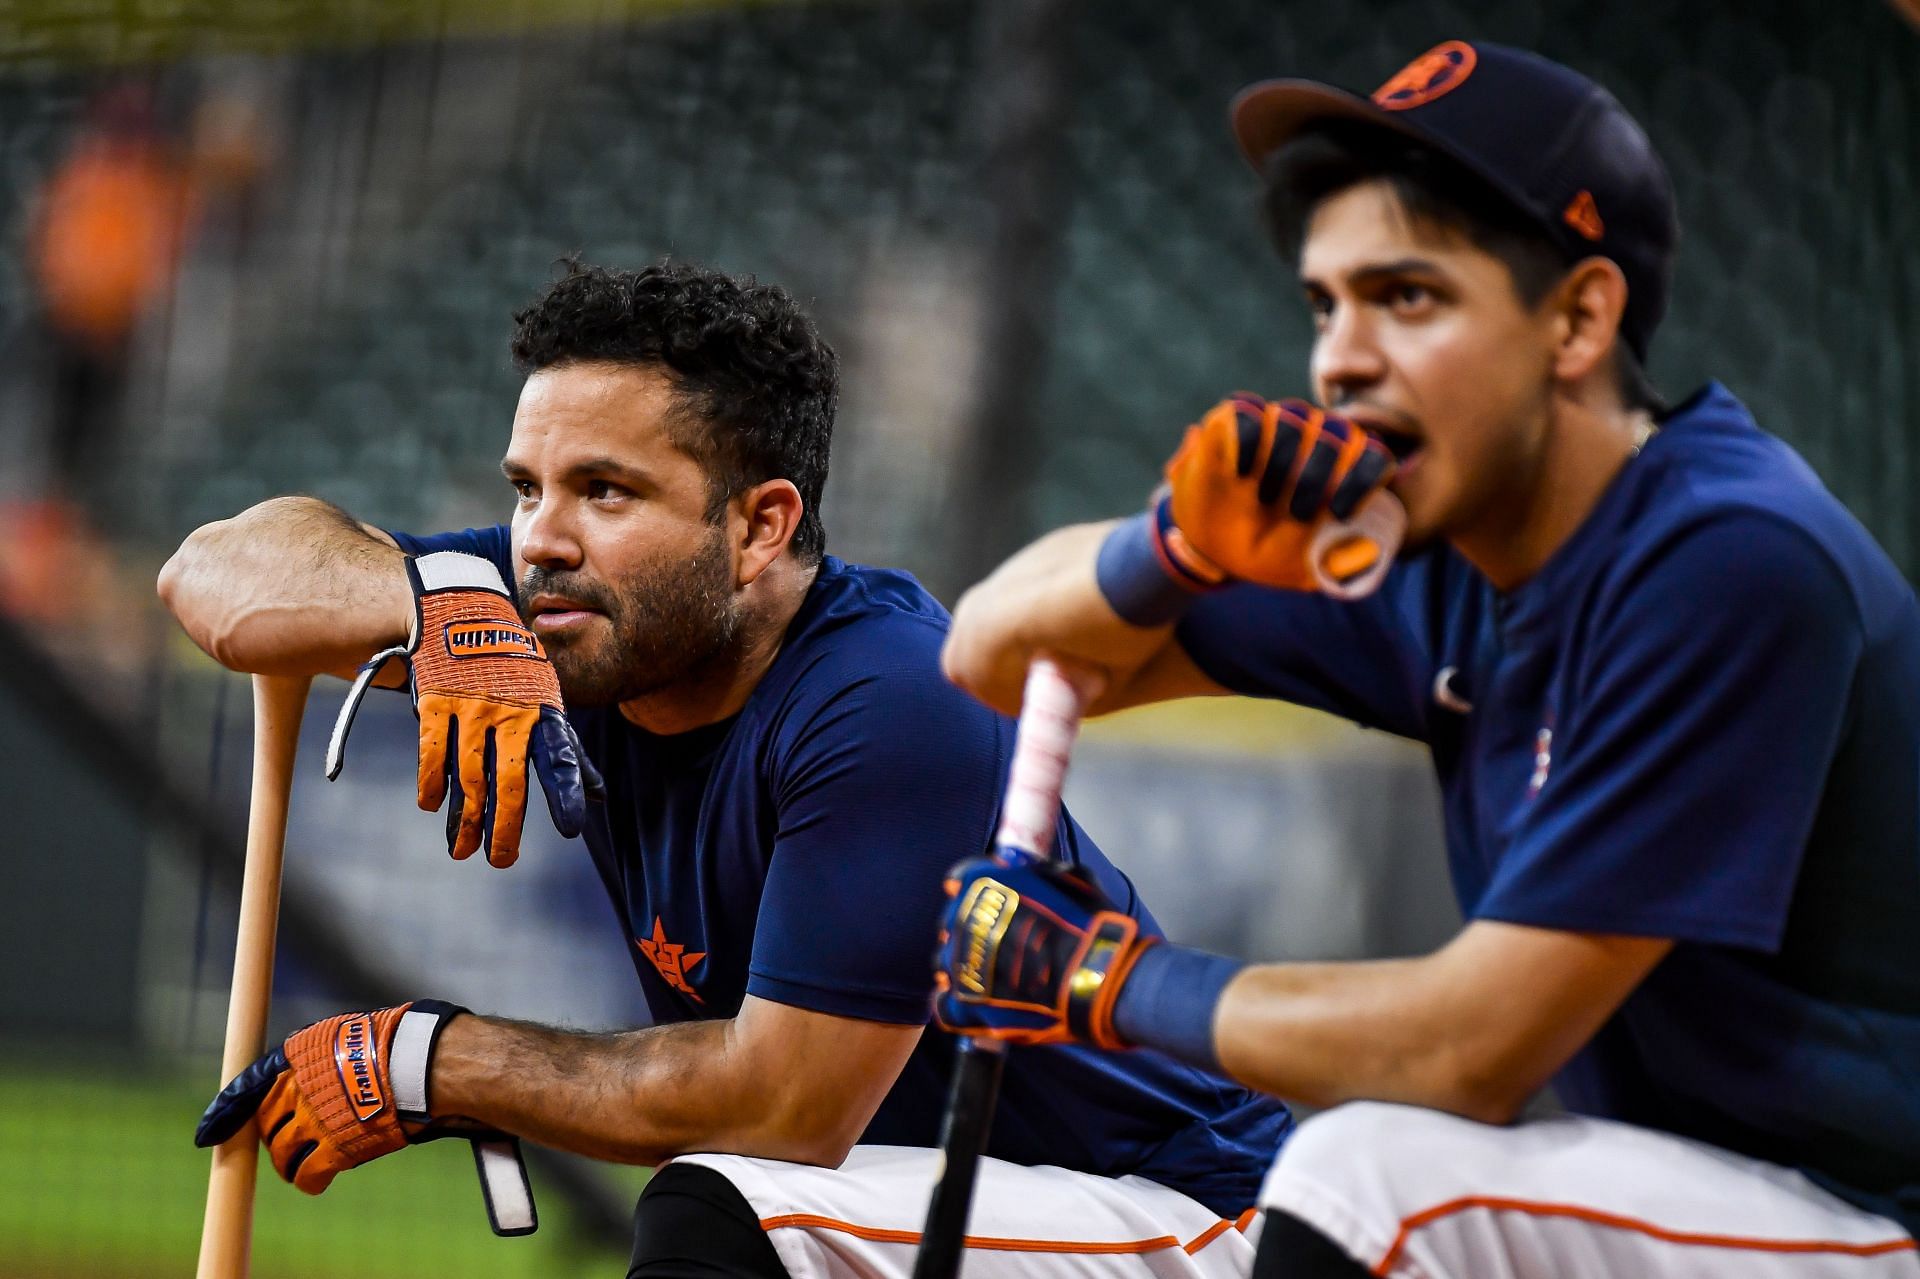 Jose Altuve Releases Statement On Buzzer Cheating Allegations